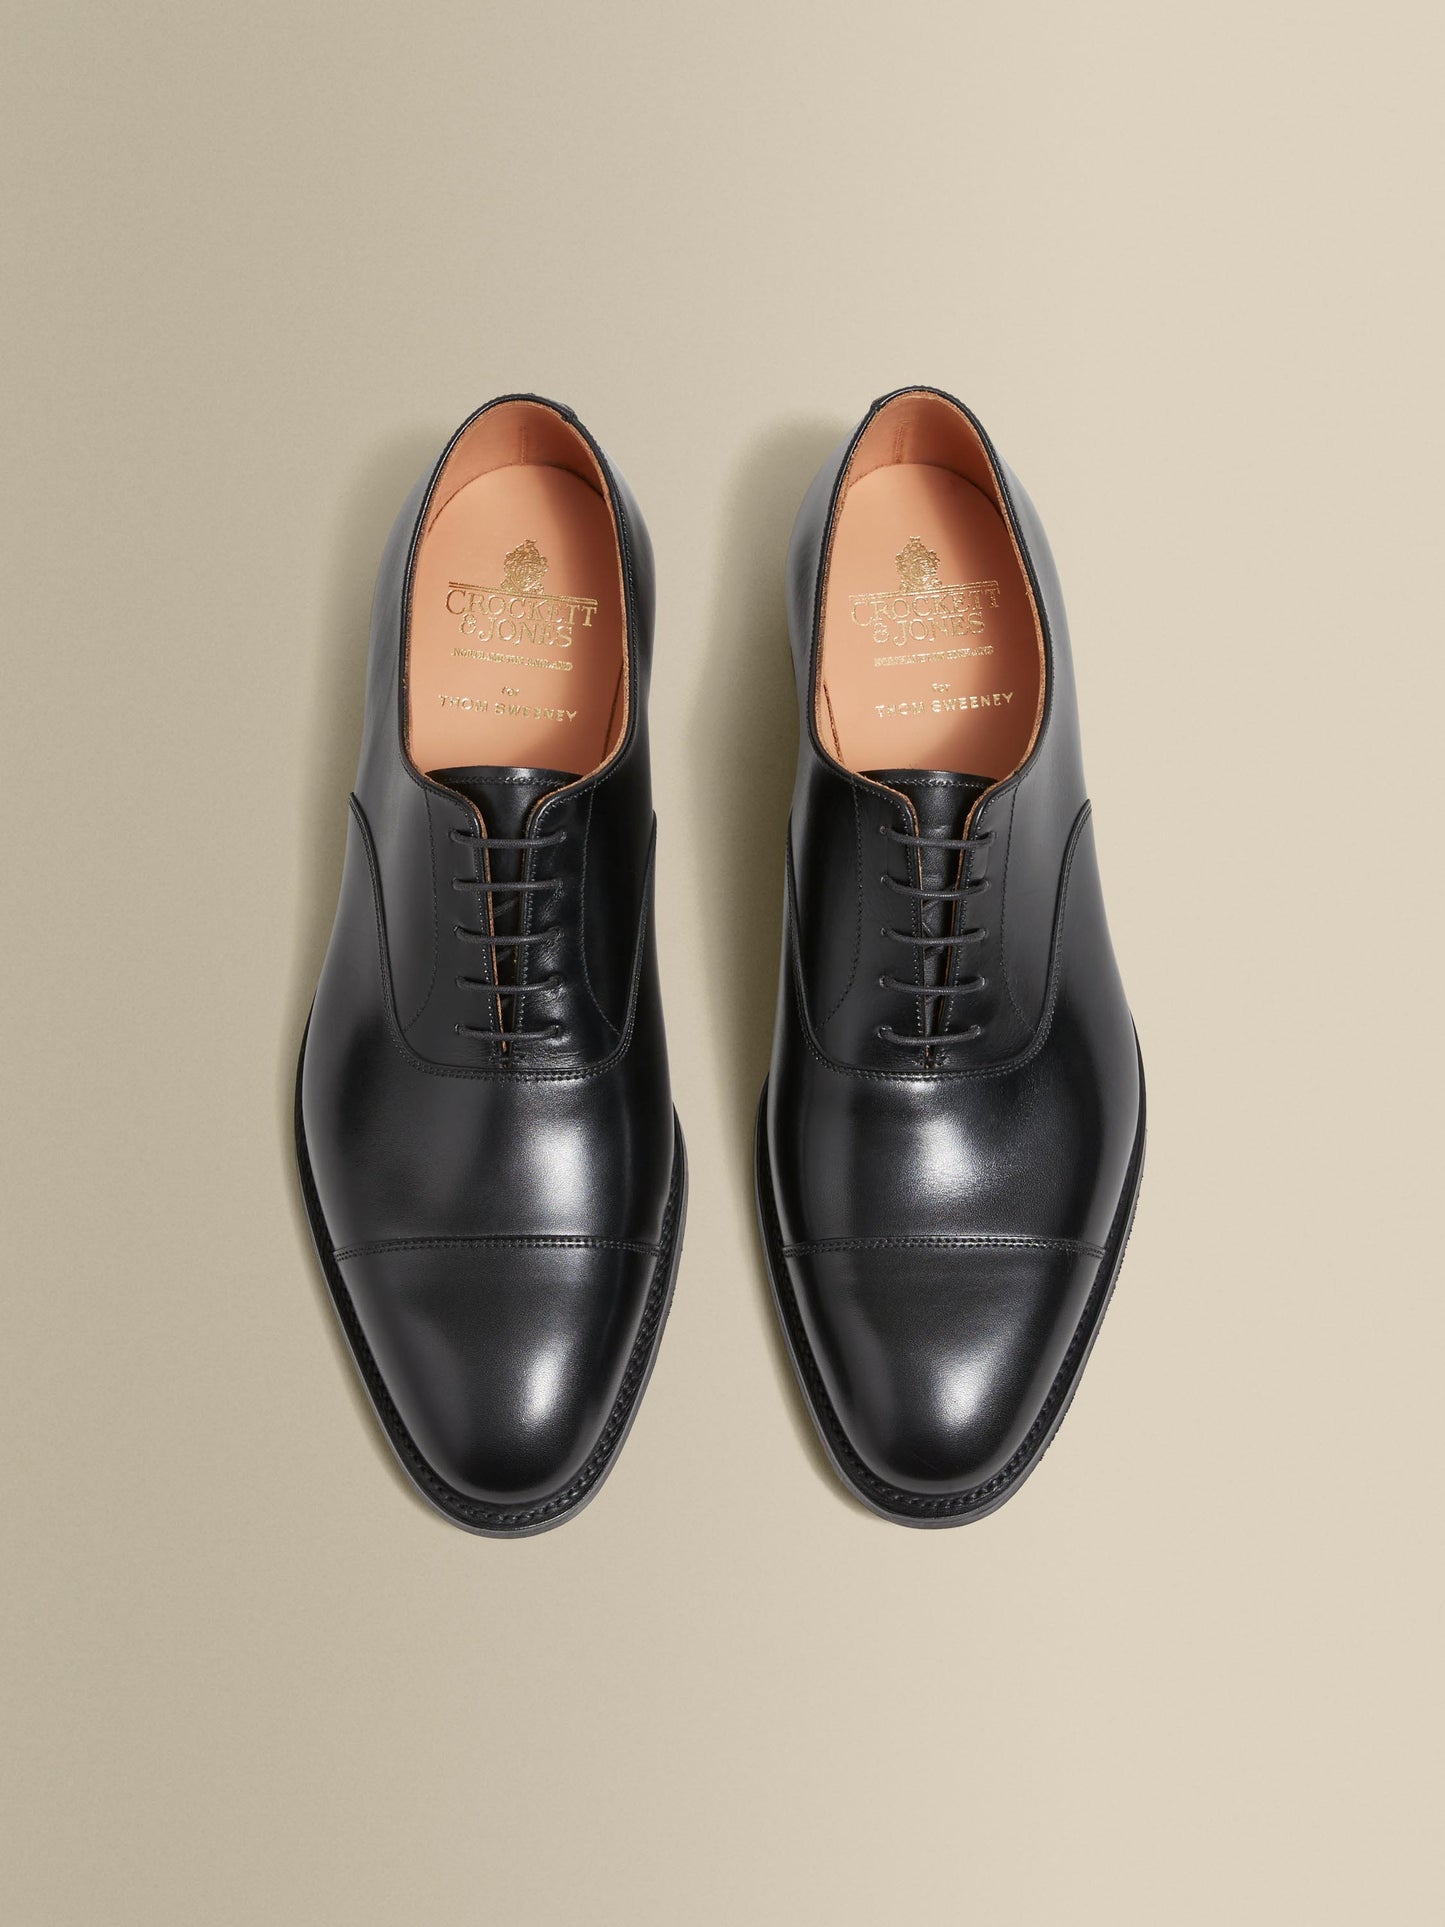 Calf Leather Oxford Shoes Black Product Image Overhead